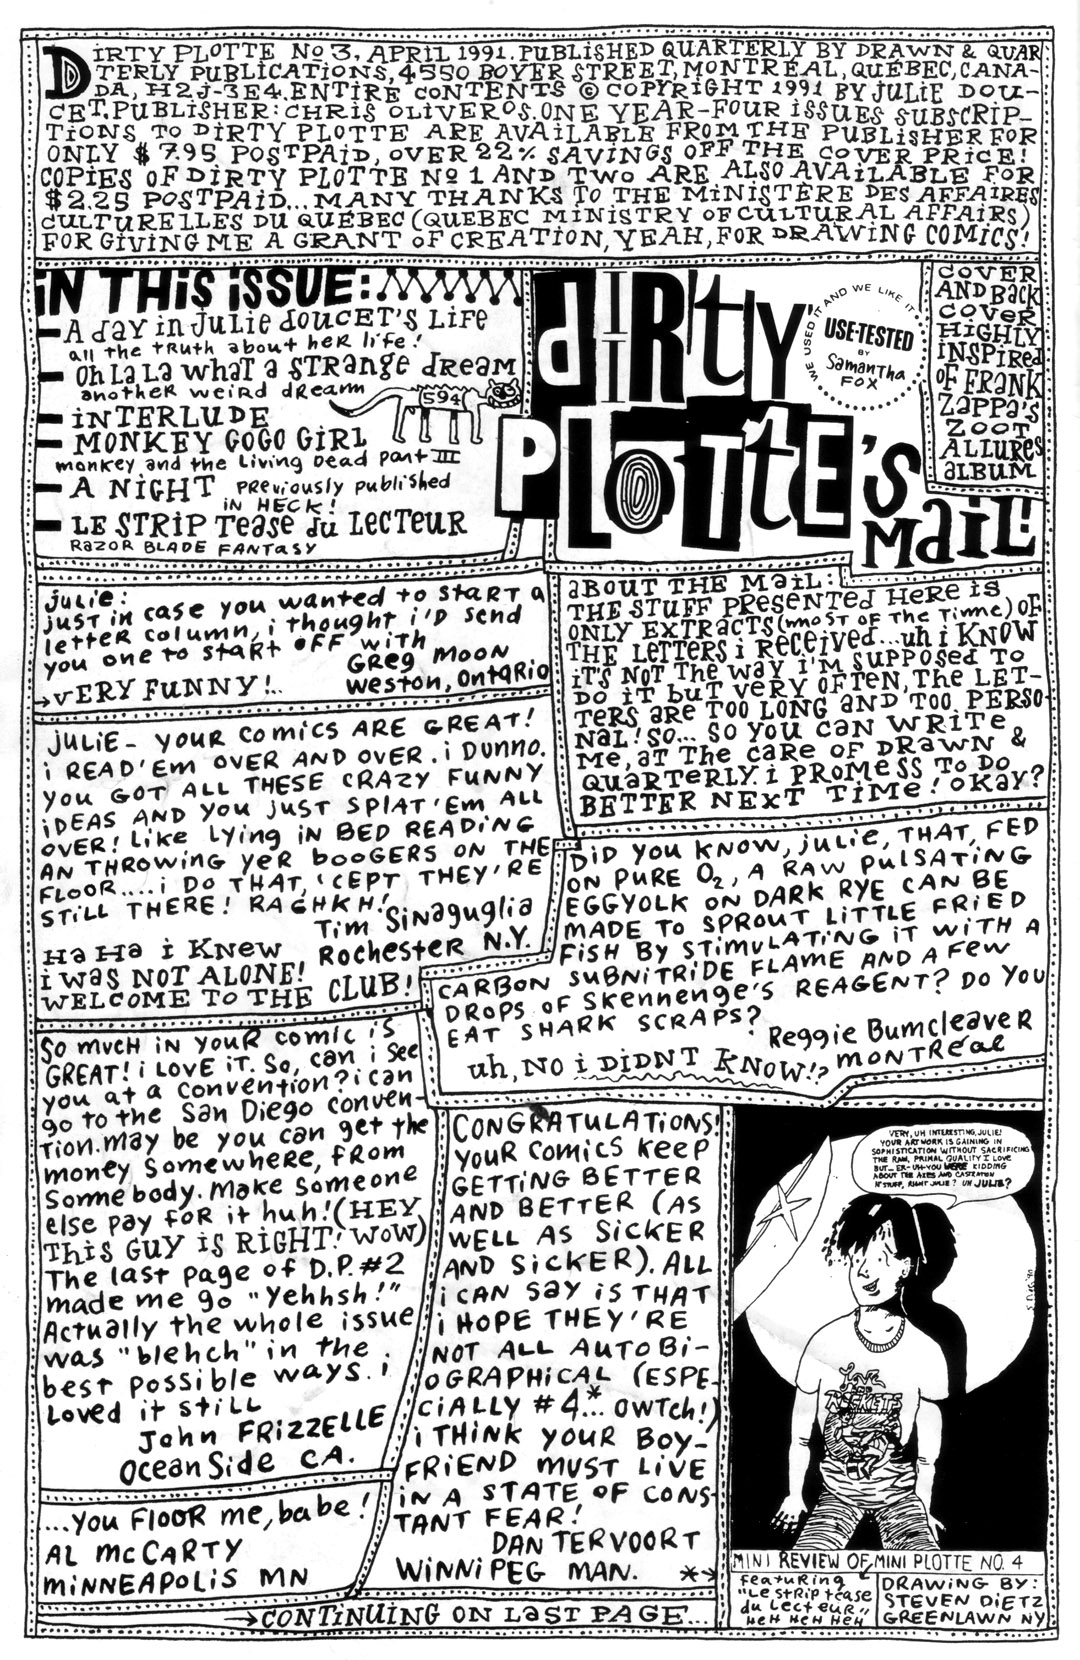 Read online Dirty Plotte comic -  Issue #3 - 2